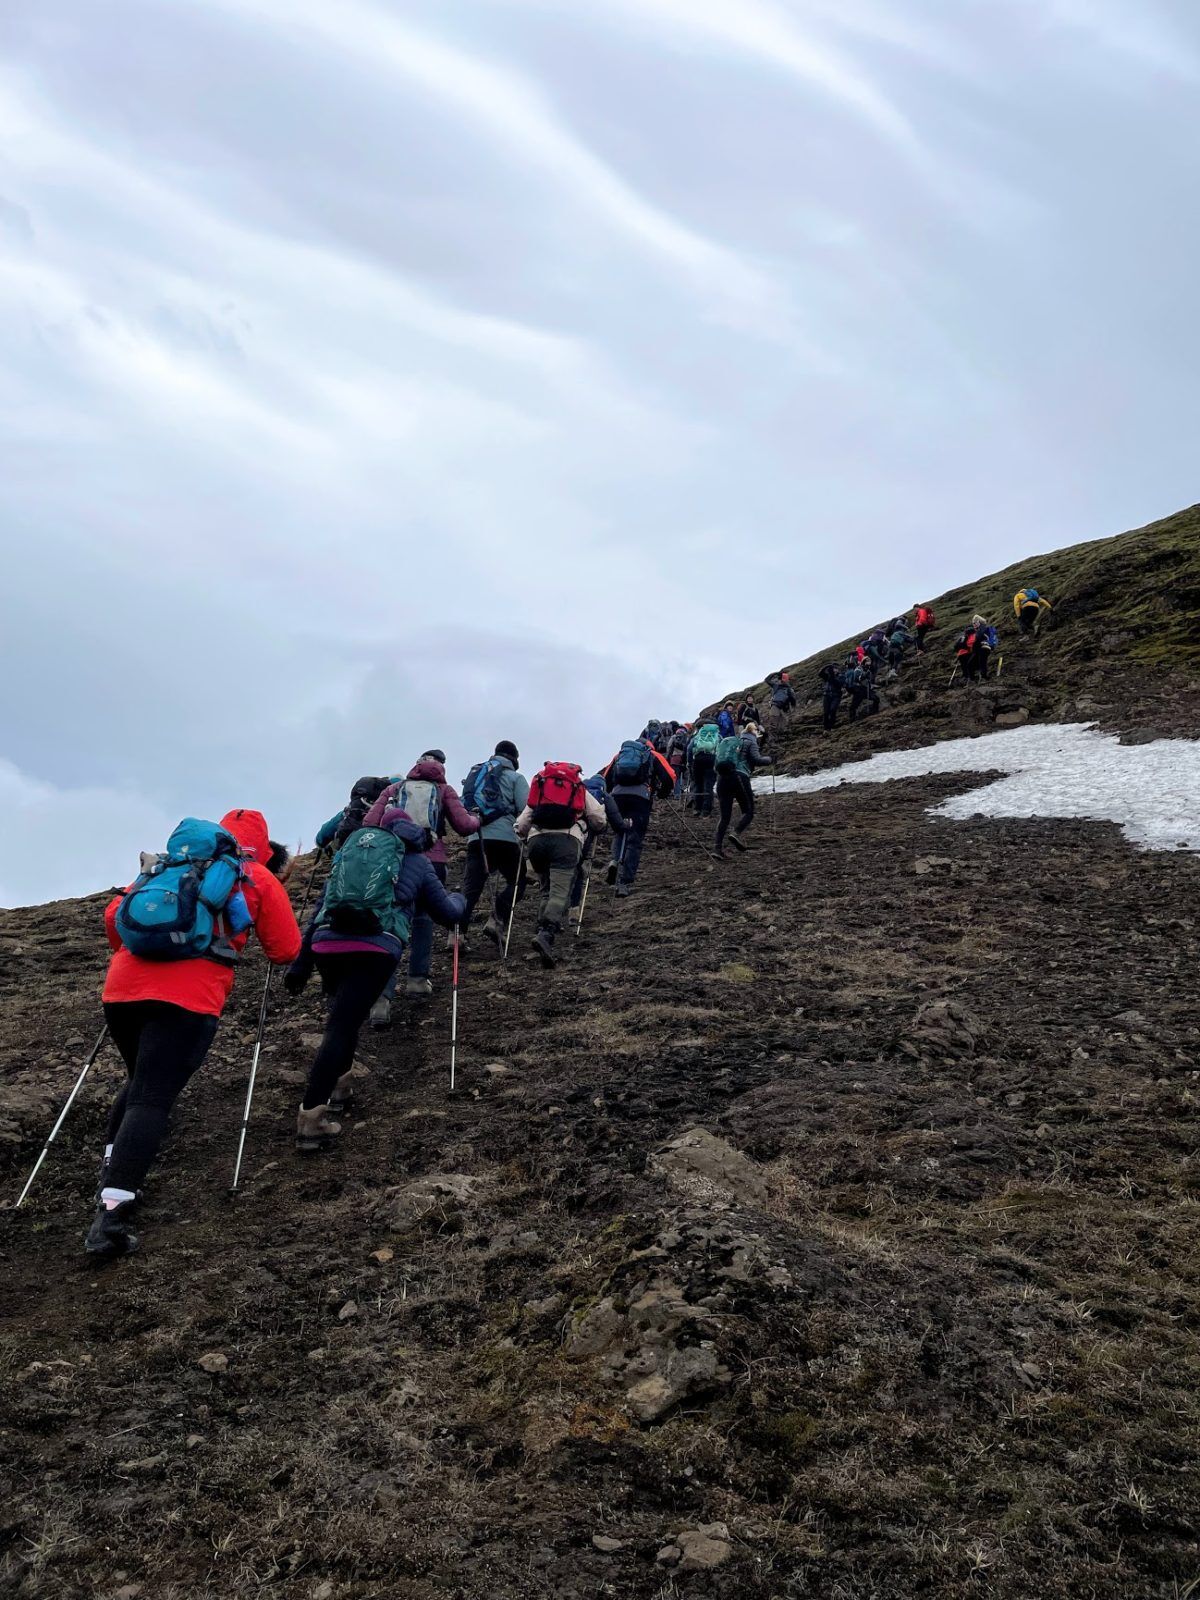 People are hiking up a steep slope in the Icelandic highlands.